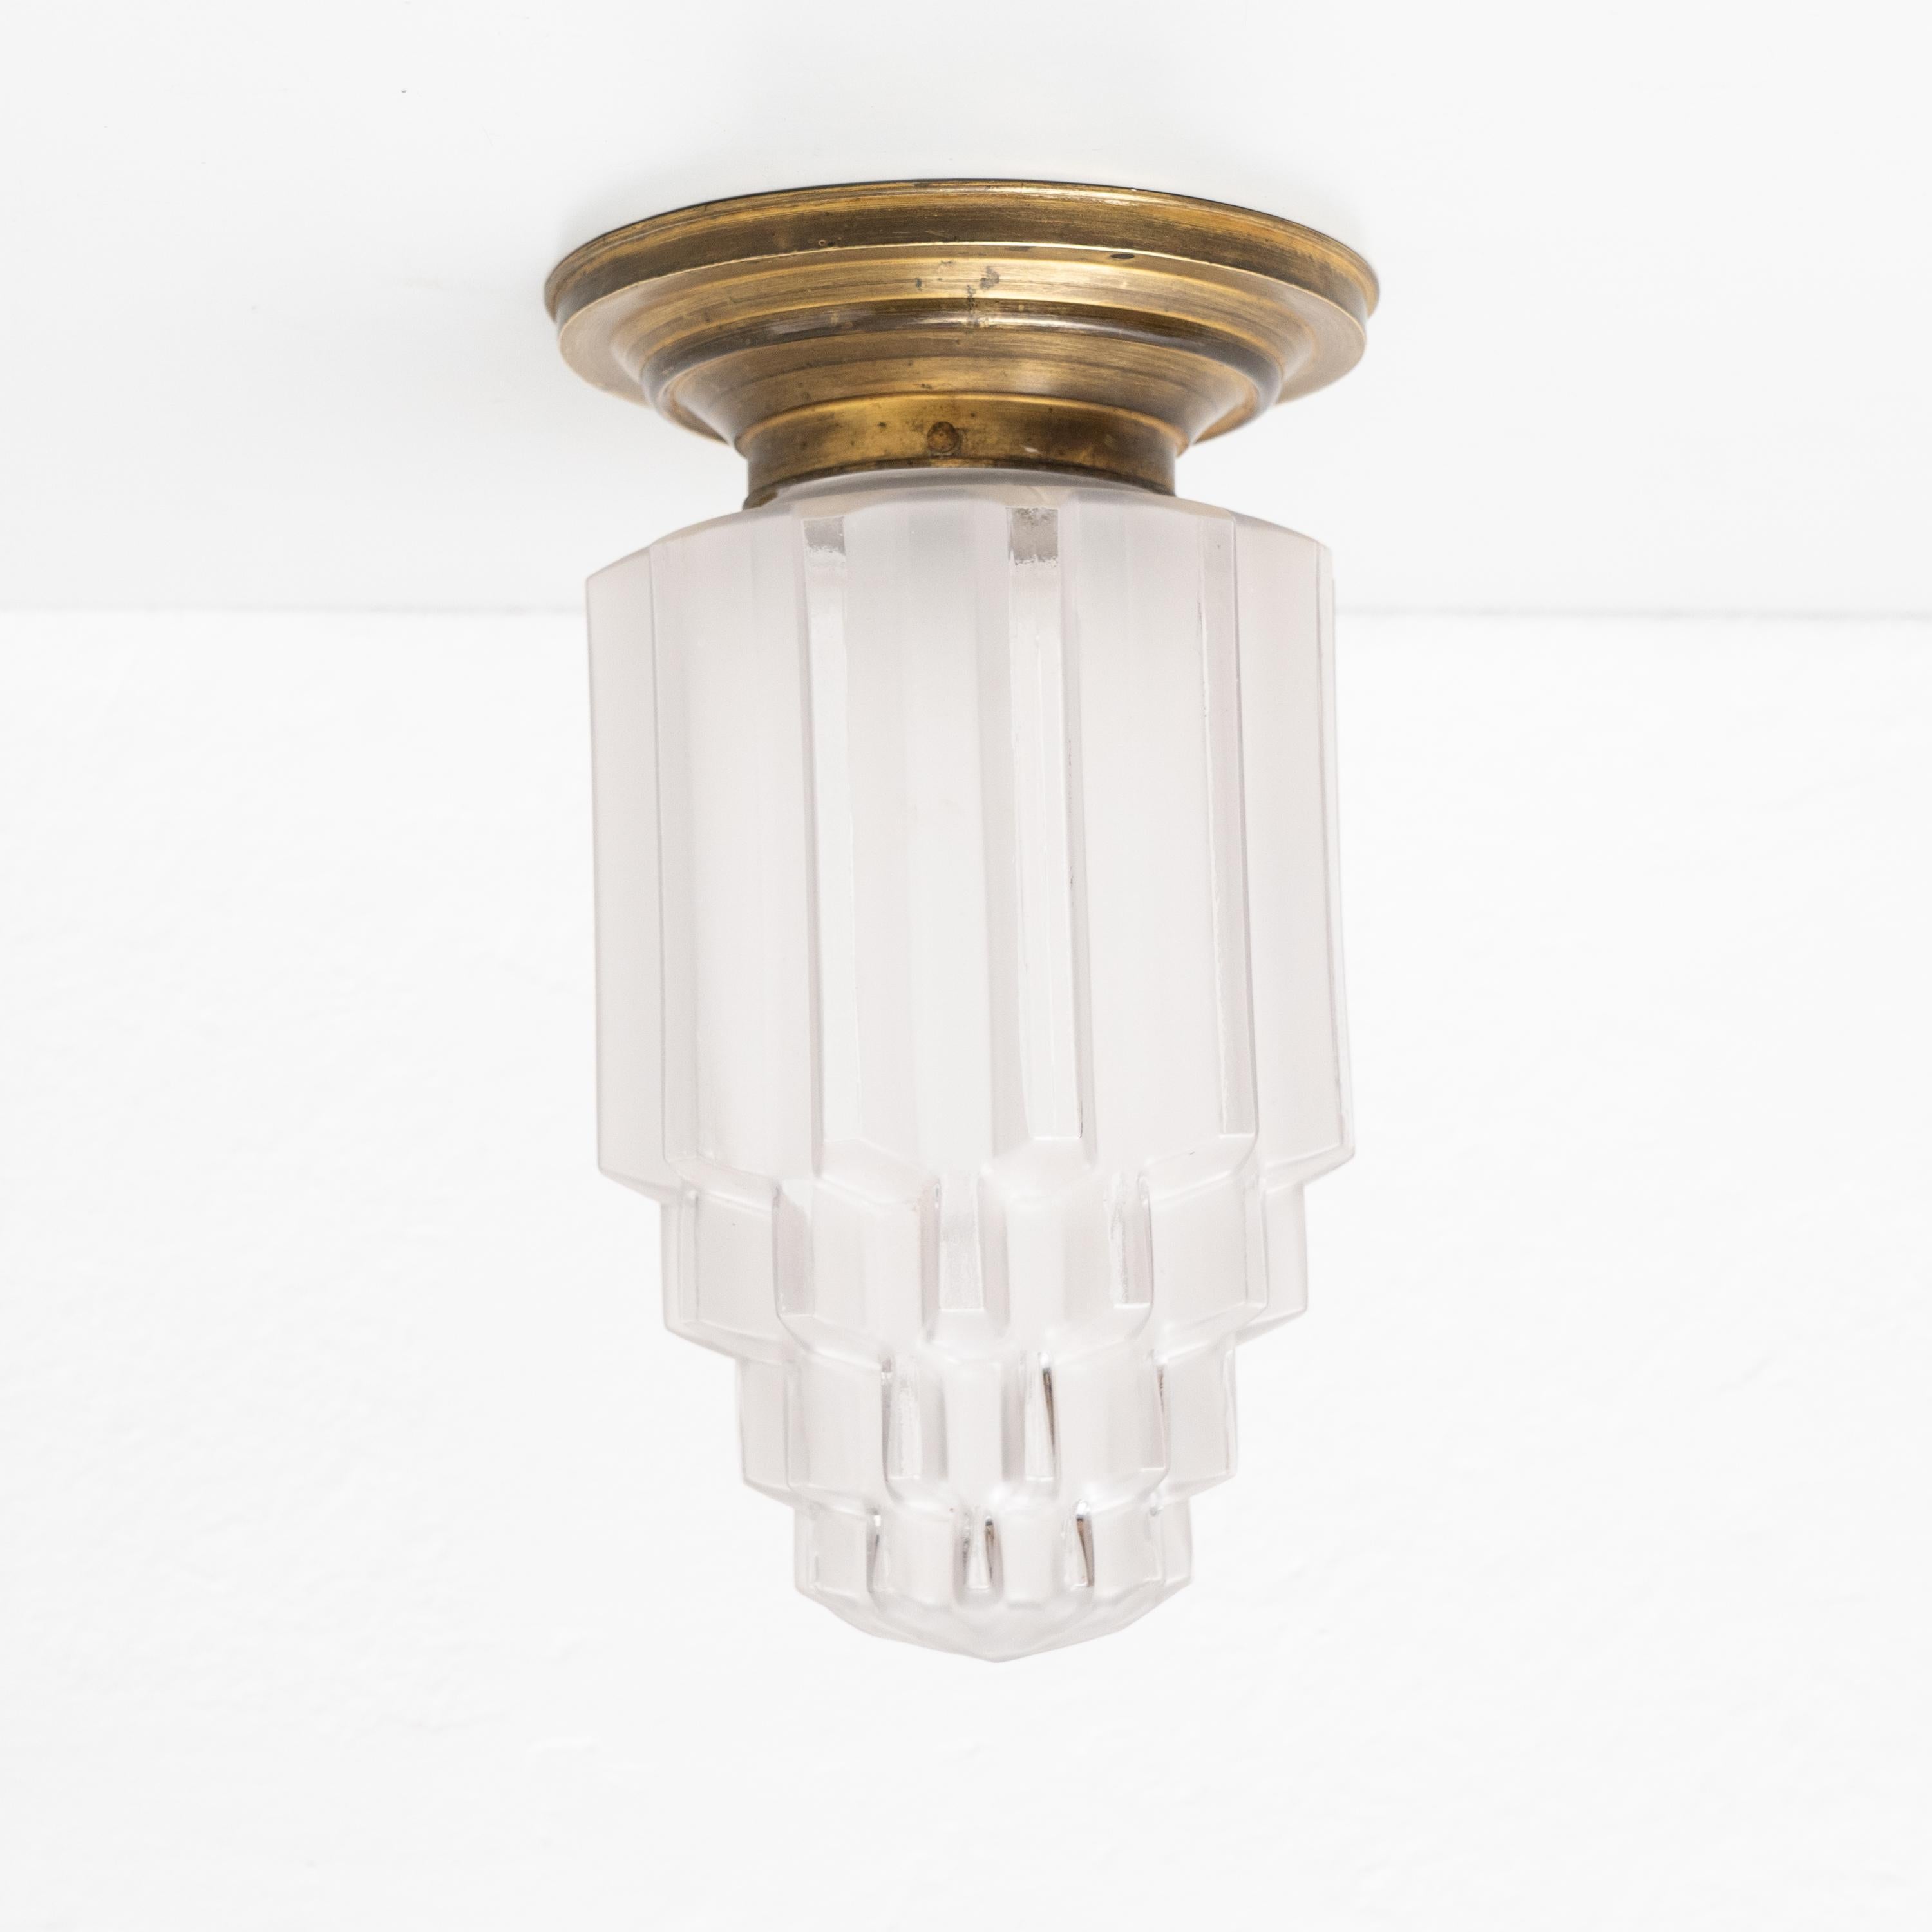 French Vintage Art Deco Brass and Glass Ceiling Lamp, circa 1940 For Sale